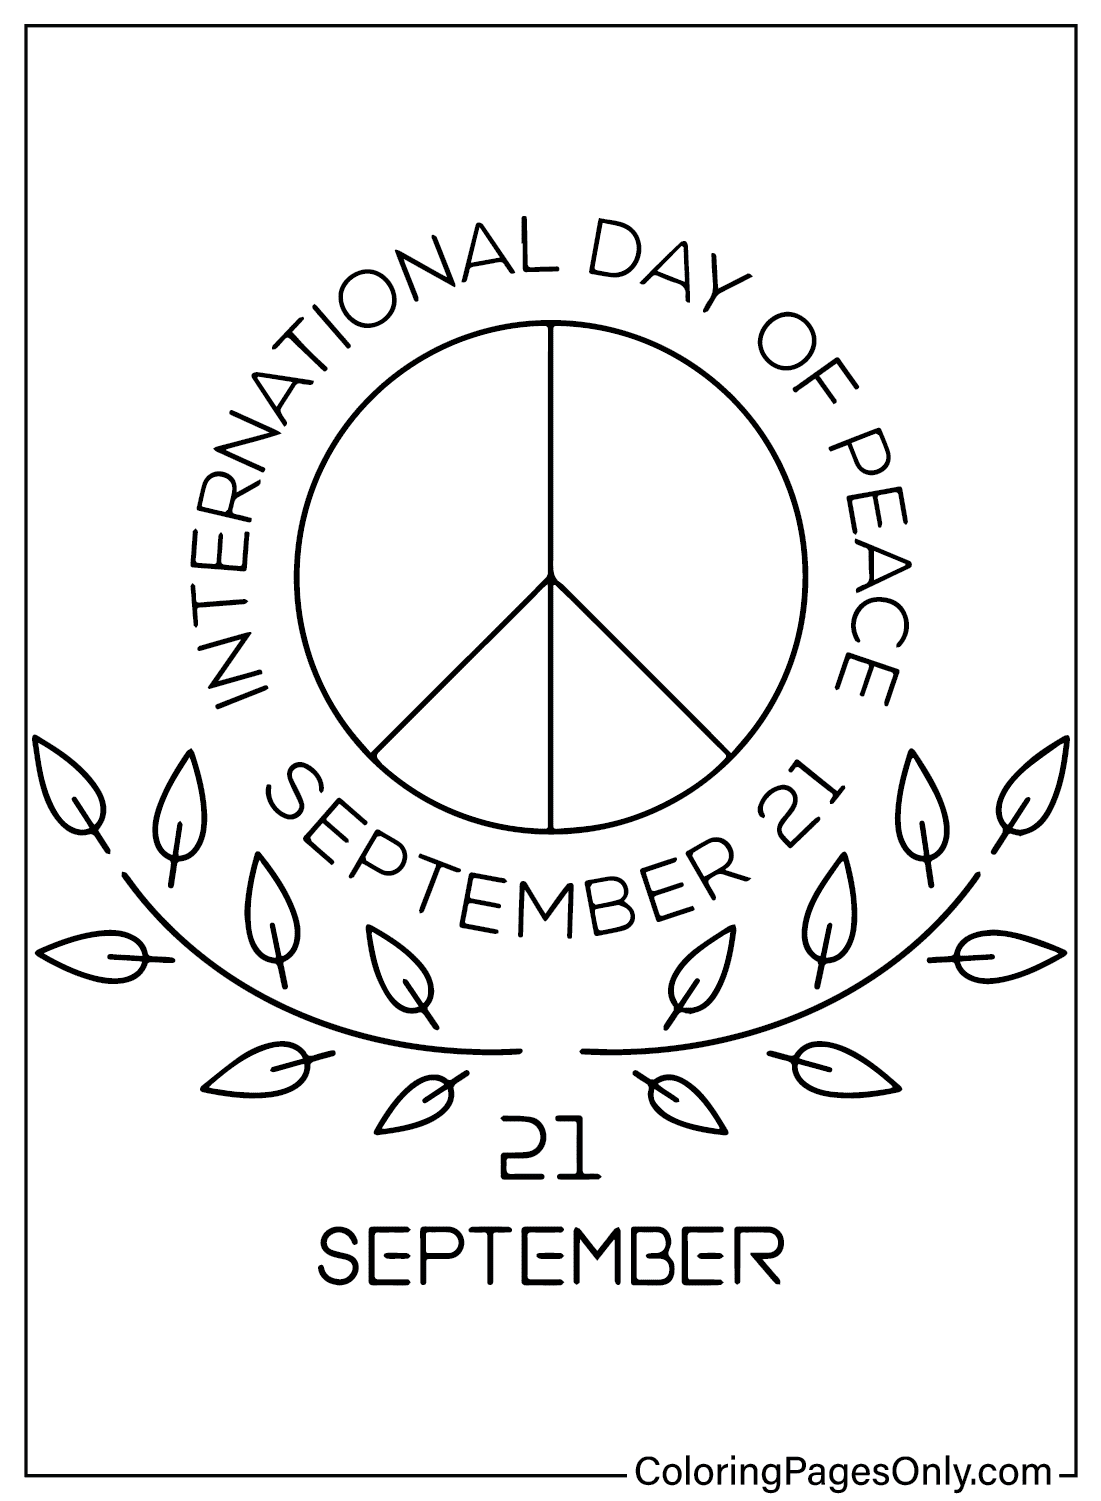 International Day of Peace Images to Color from International Day of Peace